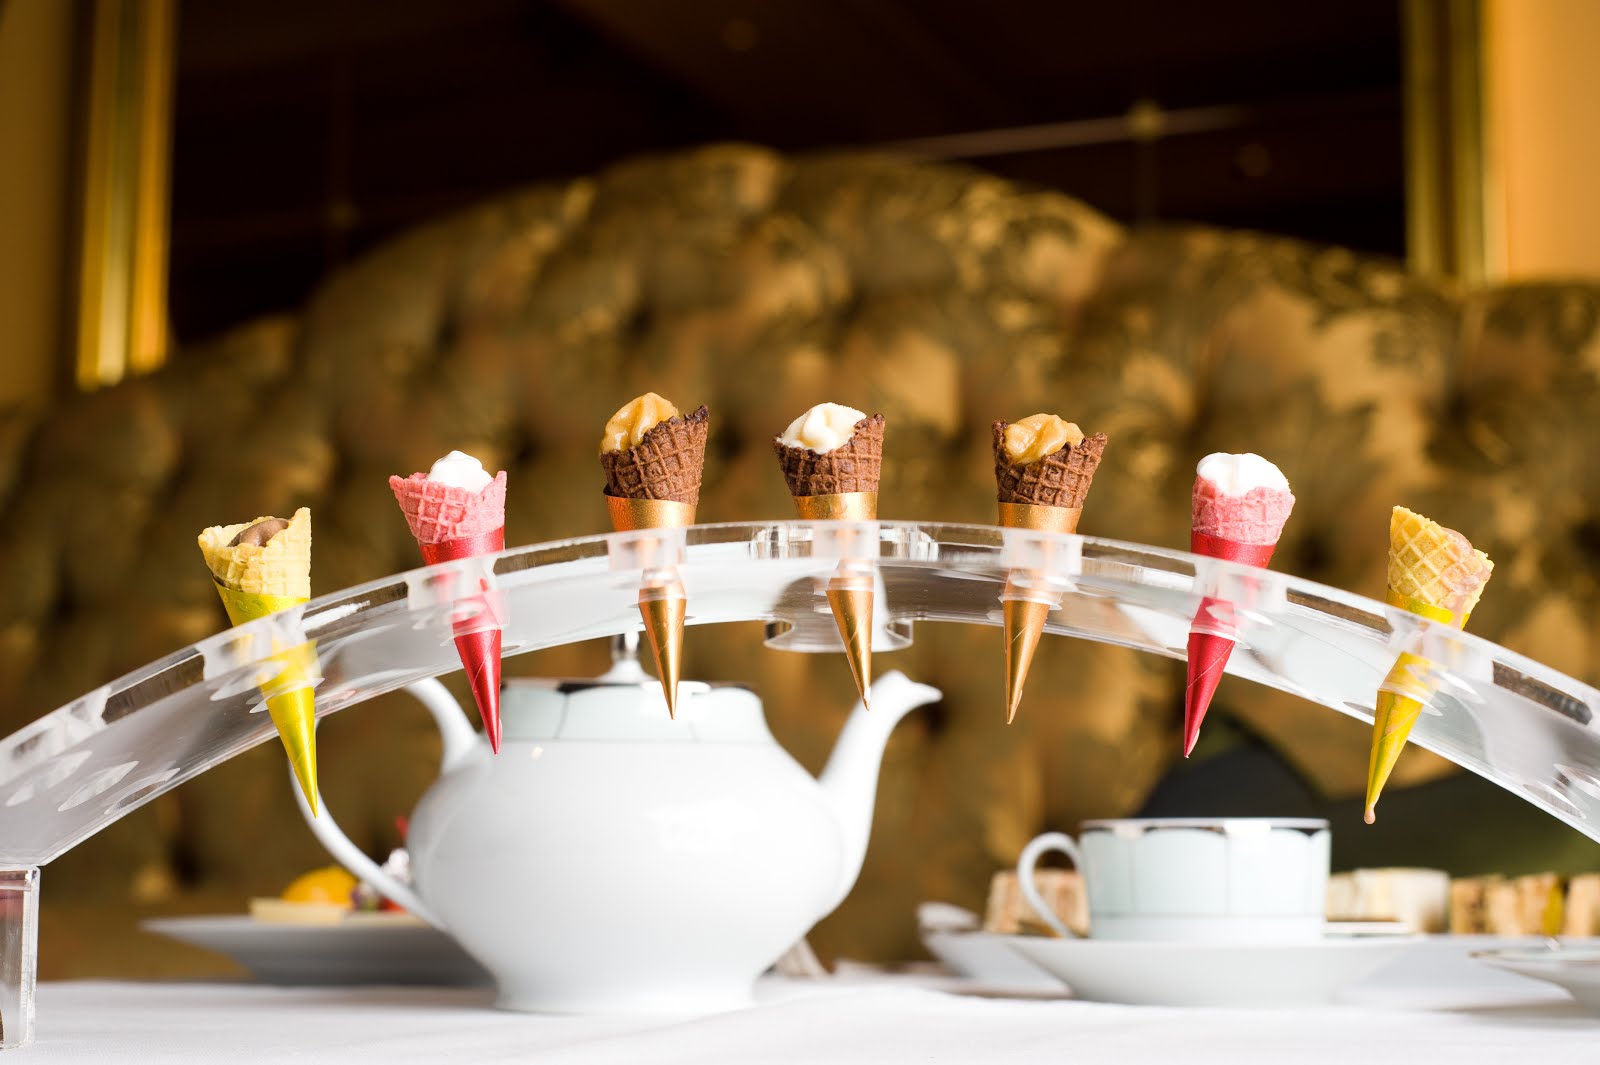 Ice Cream Champagne Afternoon Tea at the Dorchester